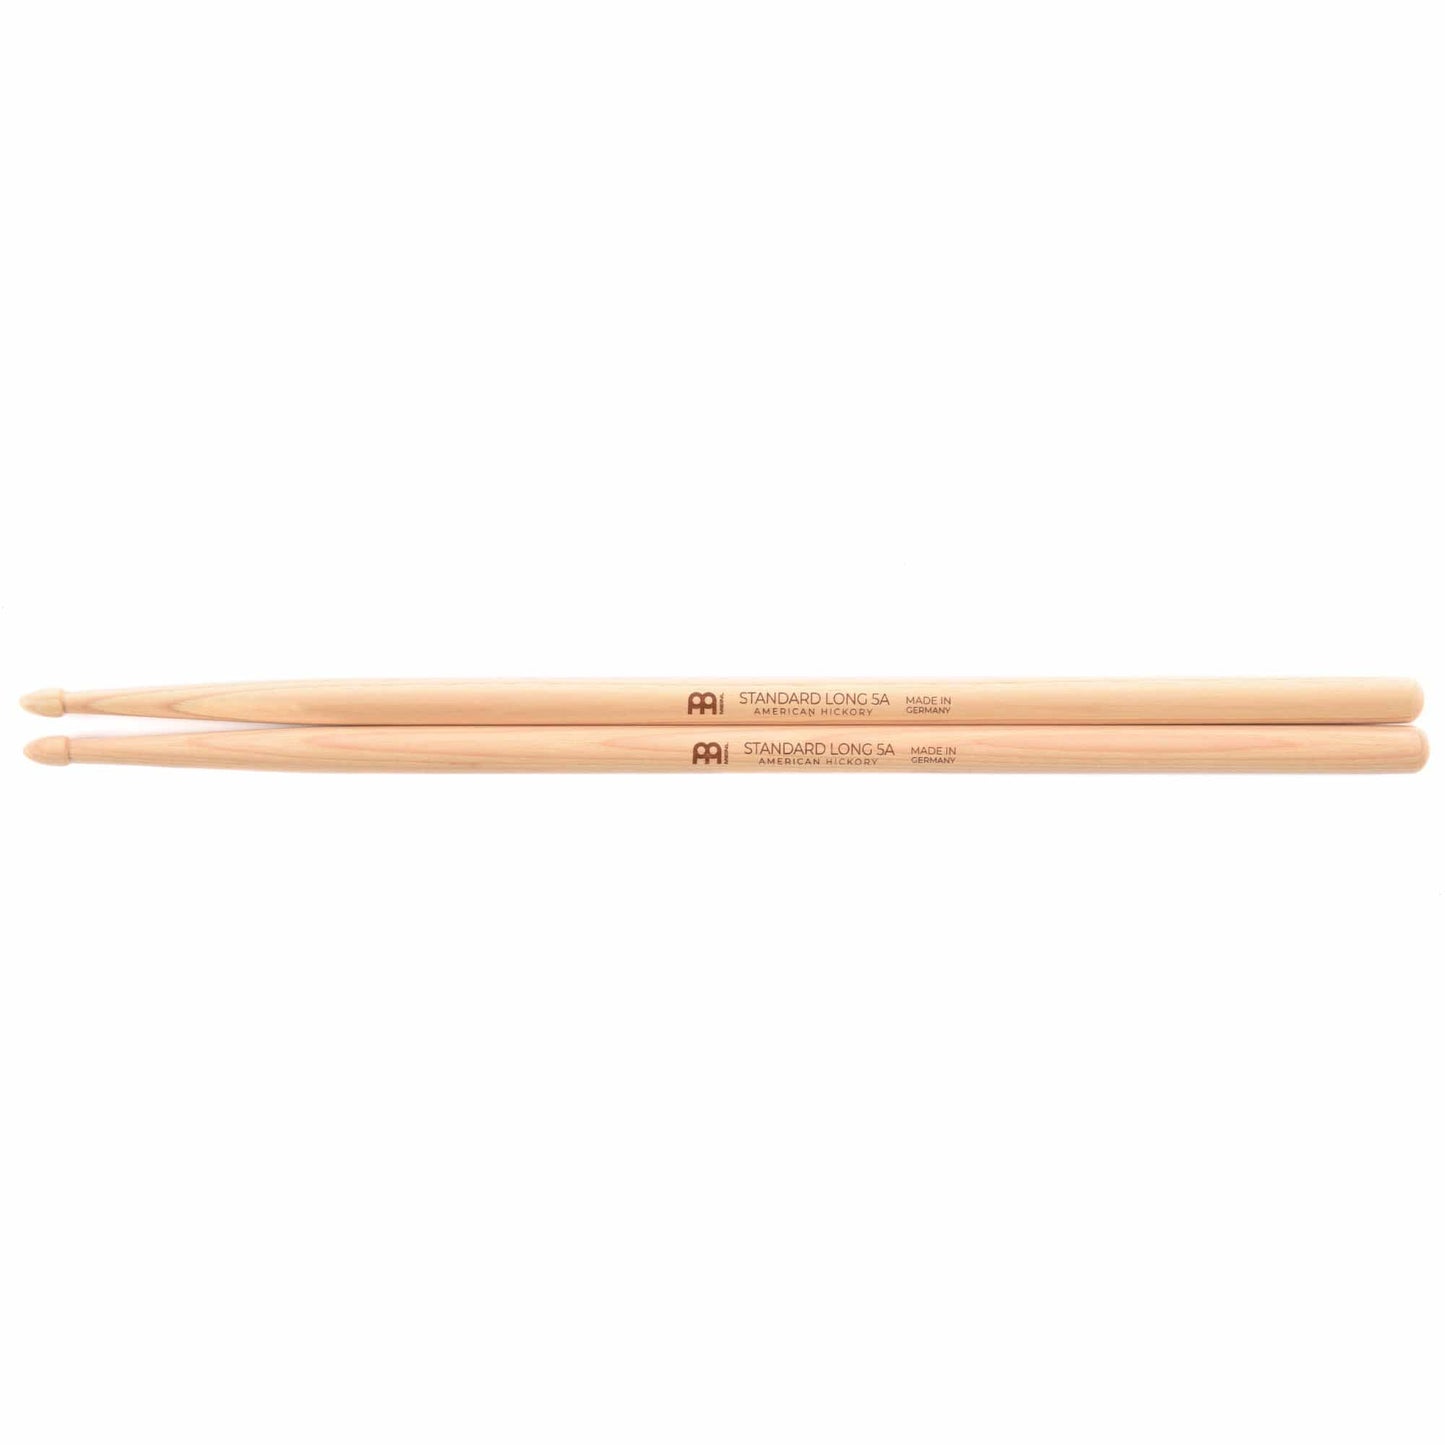 Meinl Standard Long 5A Wood Tip Drum Sticks Drums and Percussion / Parts and Accessories / Drum Sticks and Mallets